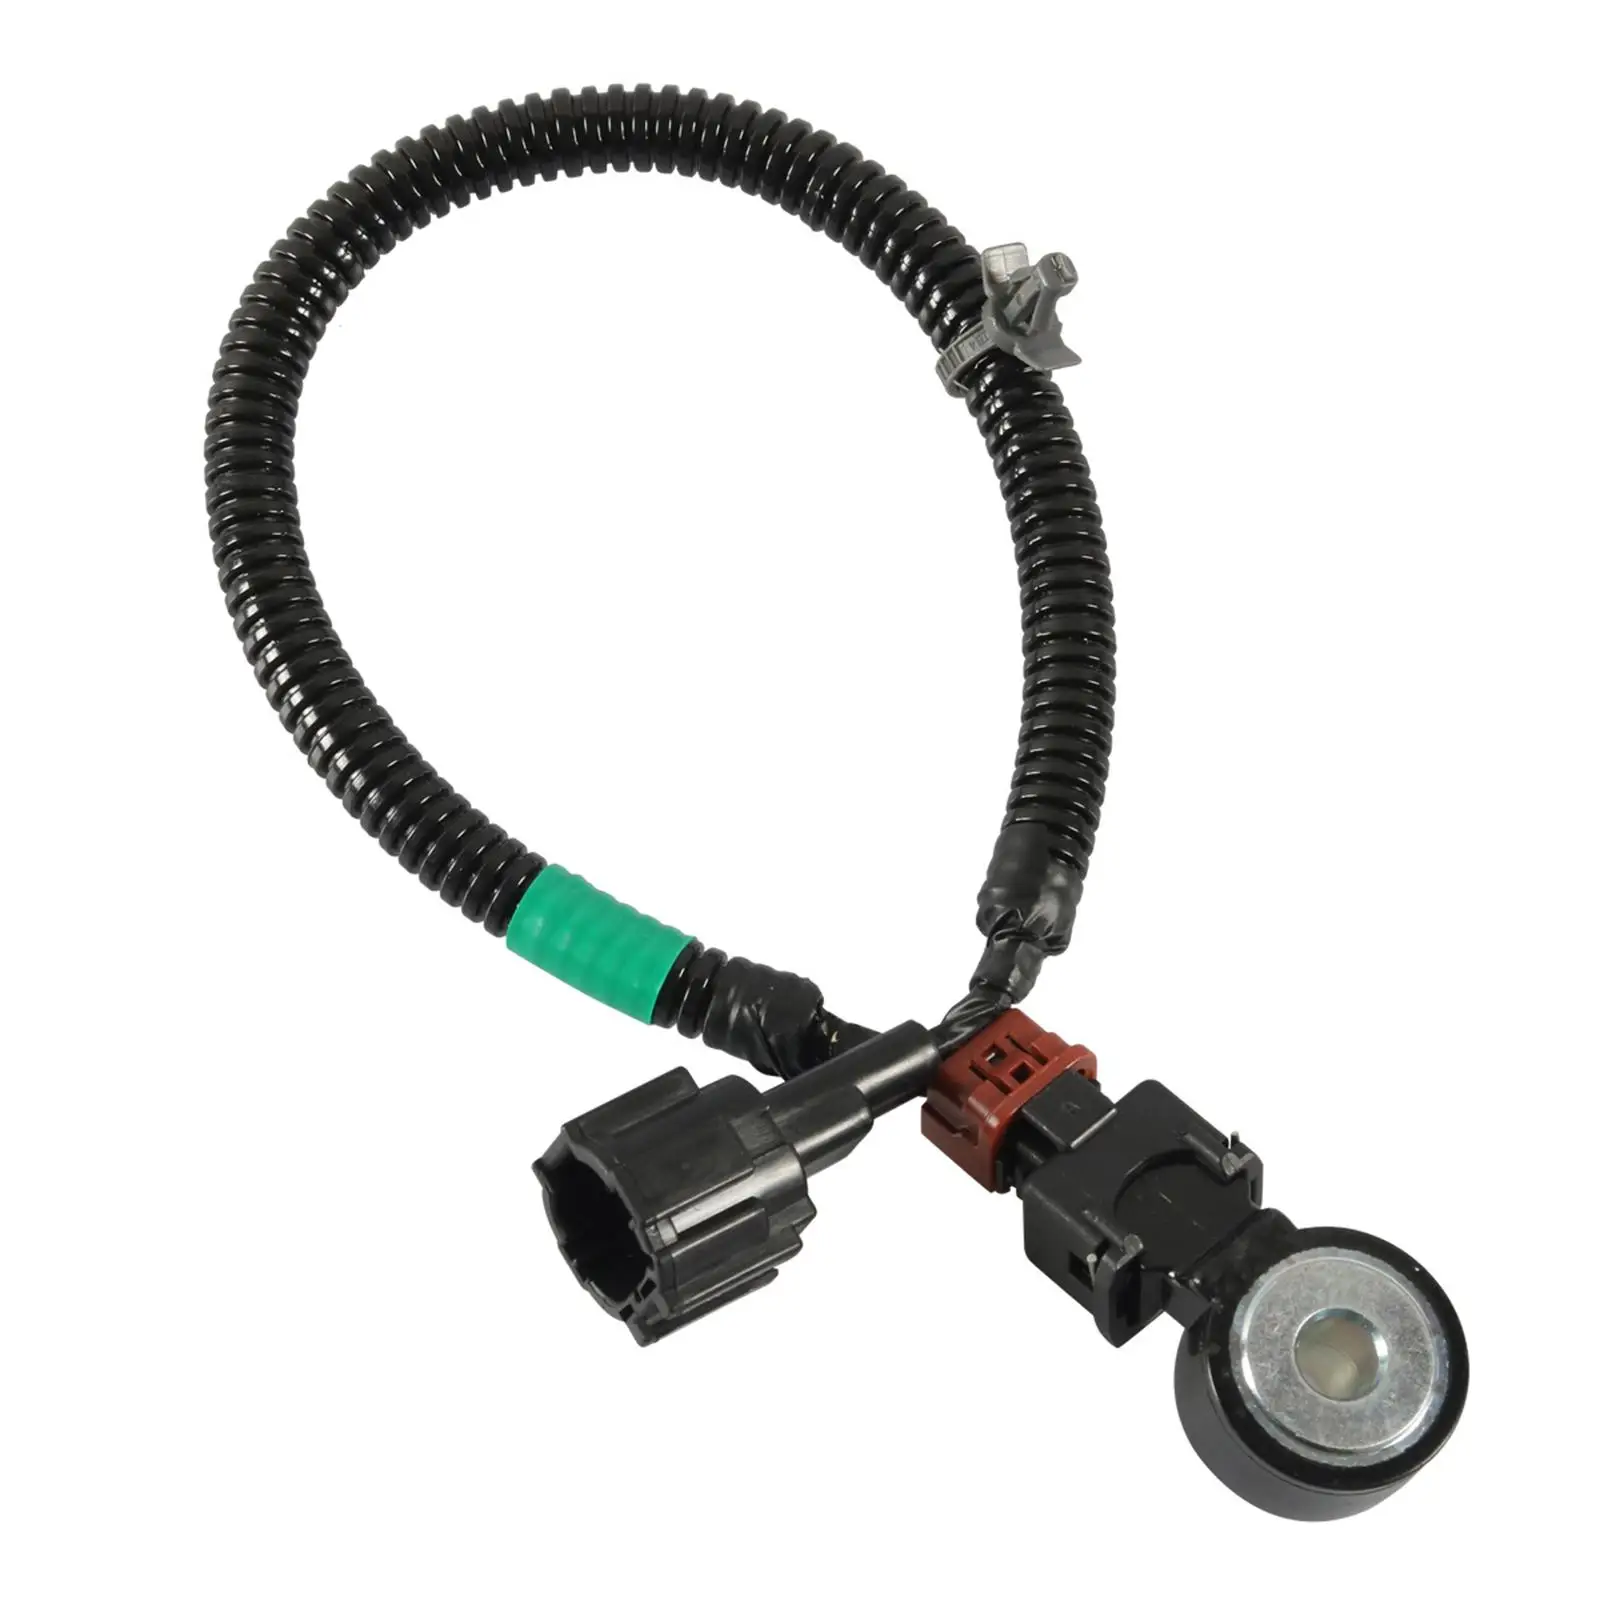 Knock Sensor and Wiring Harness 2407931U01 Fit for Nissan Parts Replace Accessories Easy to Install